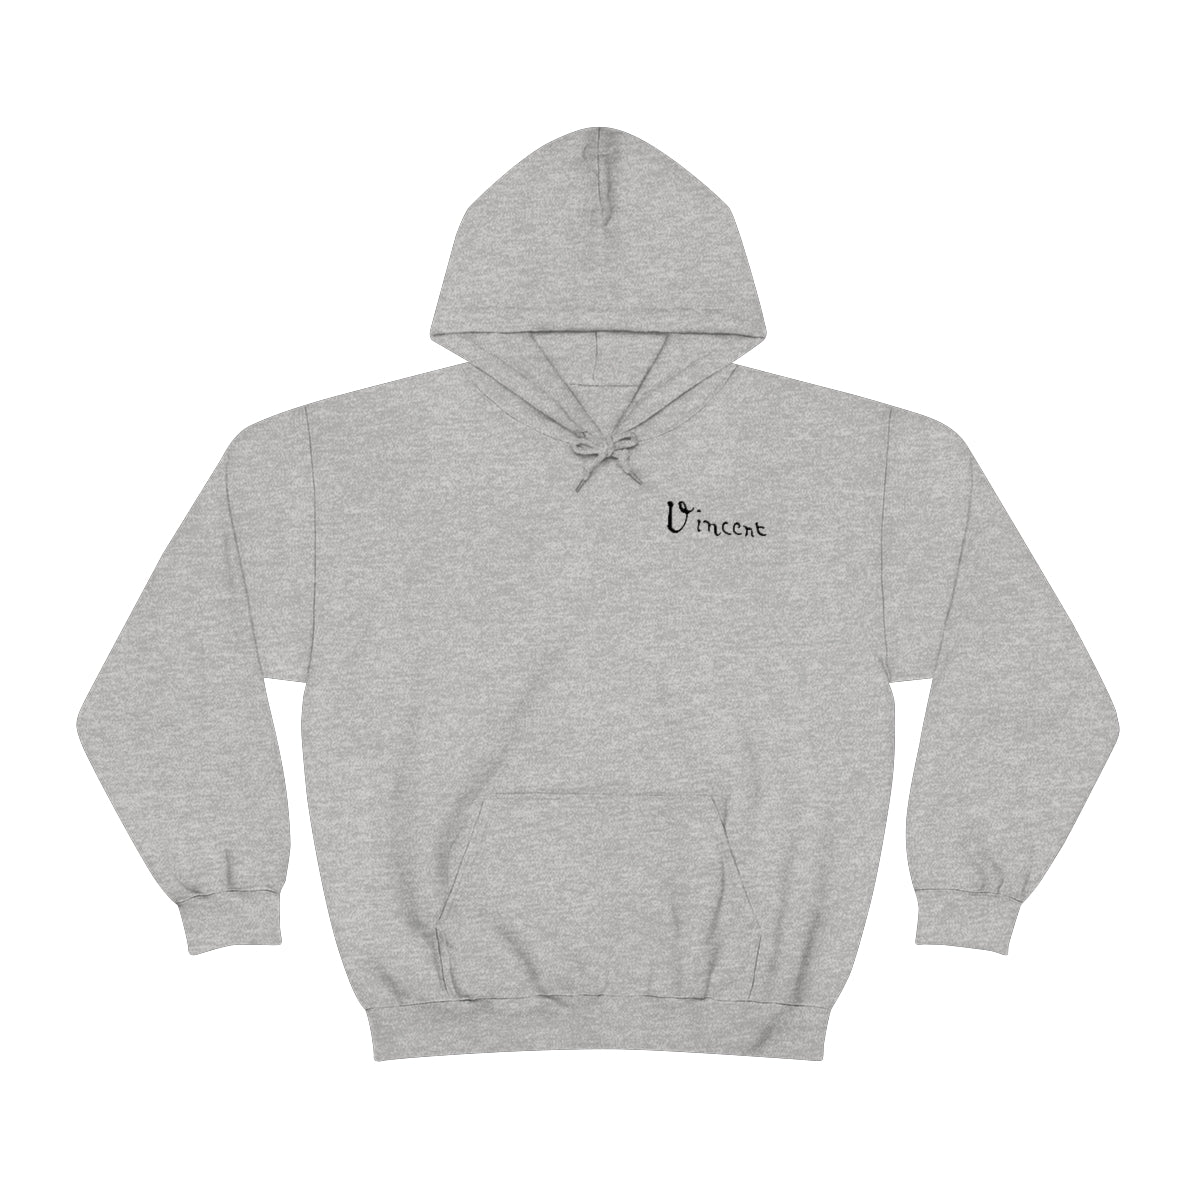 Vincent - The signature hoodie